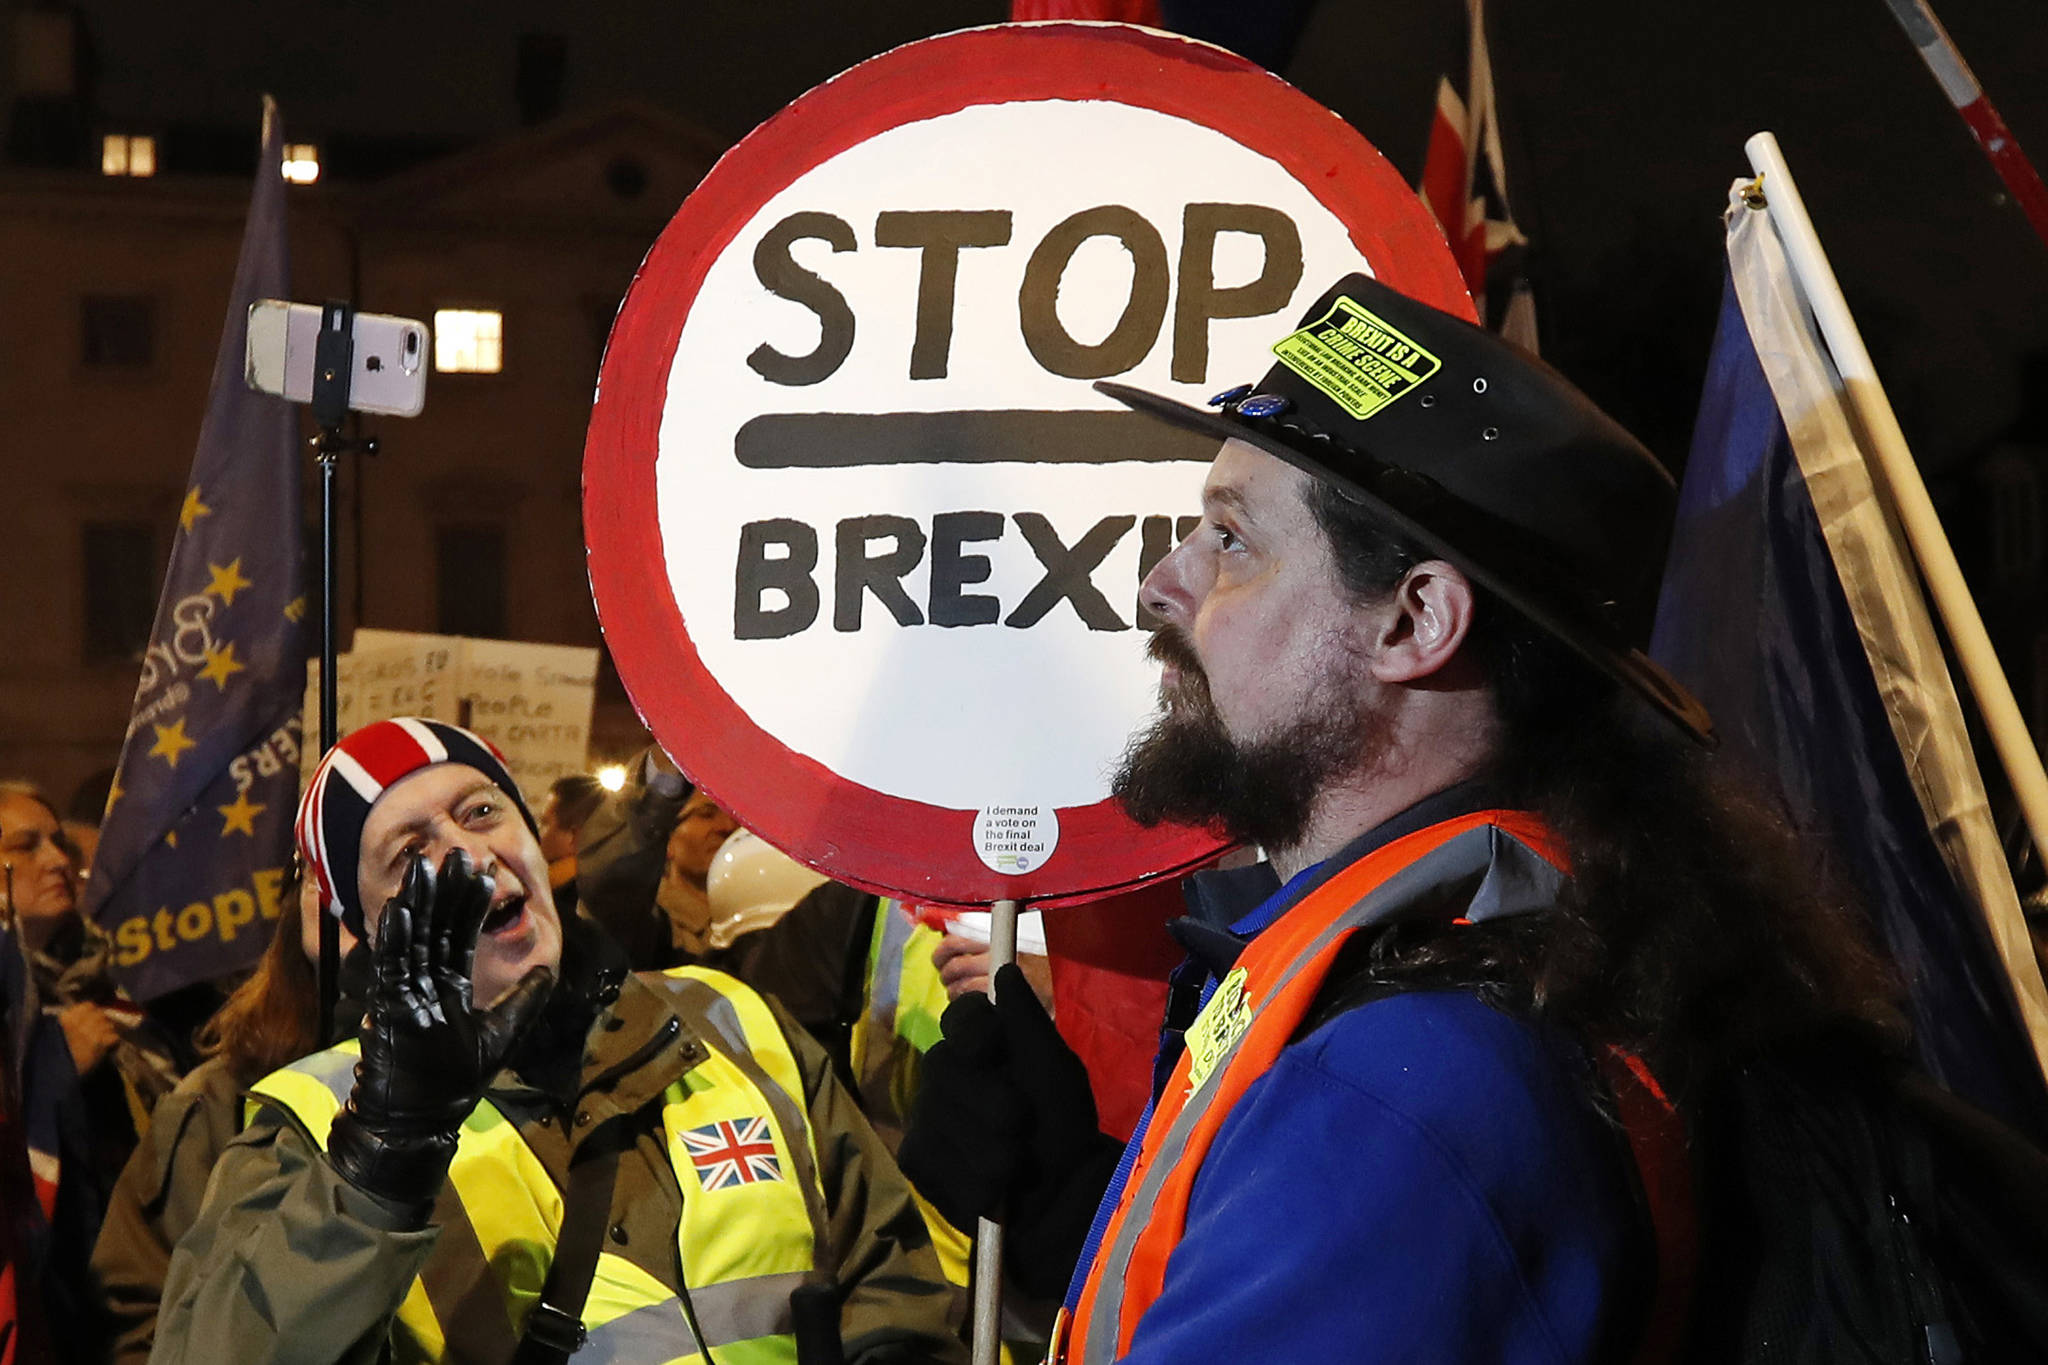 A pro-Brexit supporter, left, gestures at a remain supporter near the Parliament in London on Jan. 29, 2019. (Alastair Grant | Associated Press)